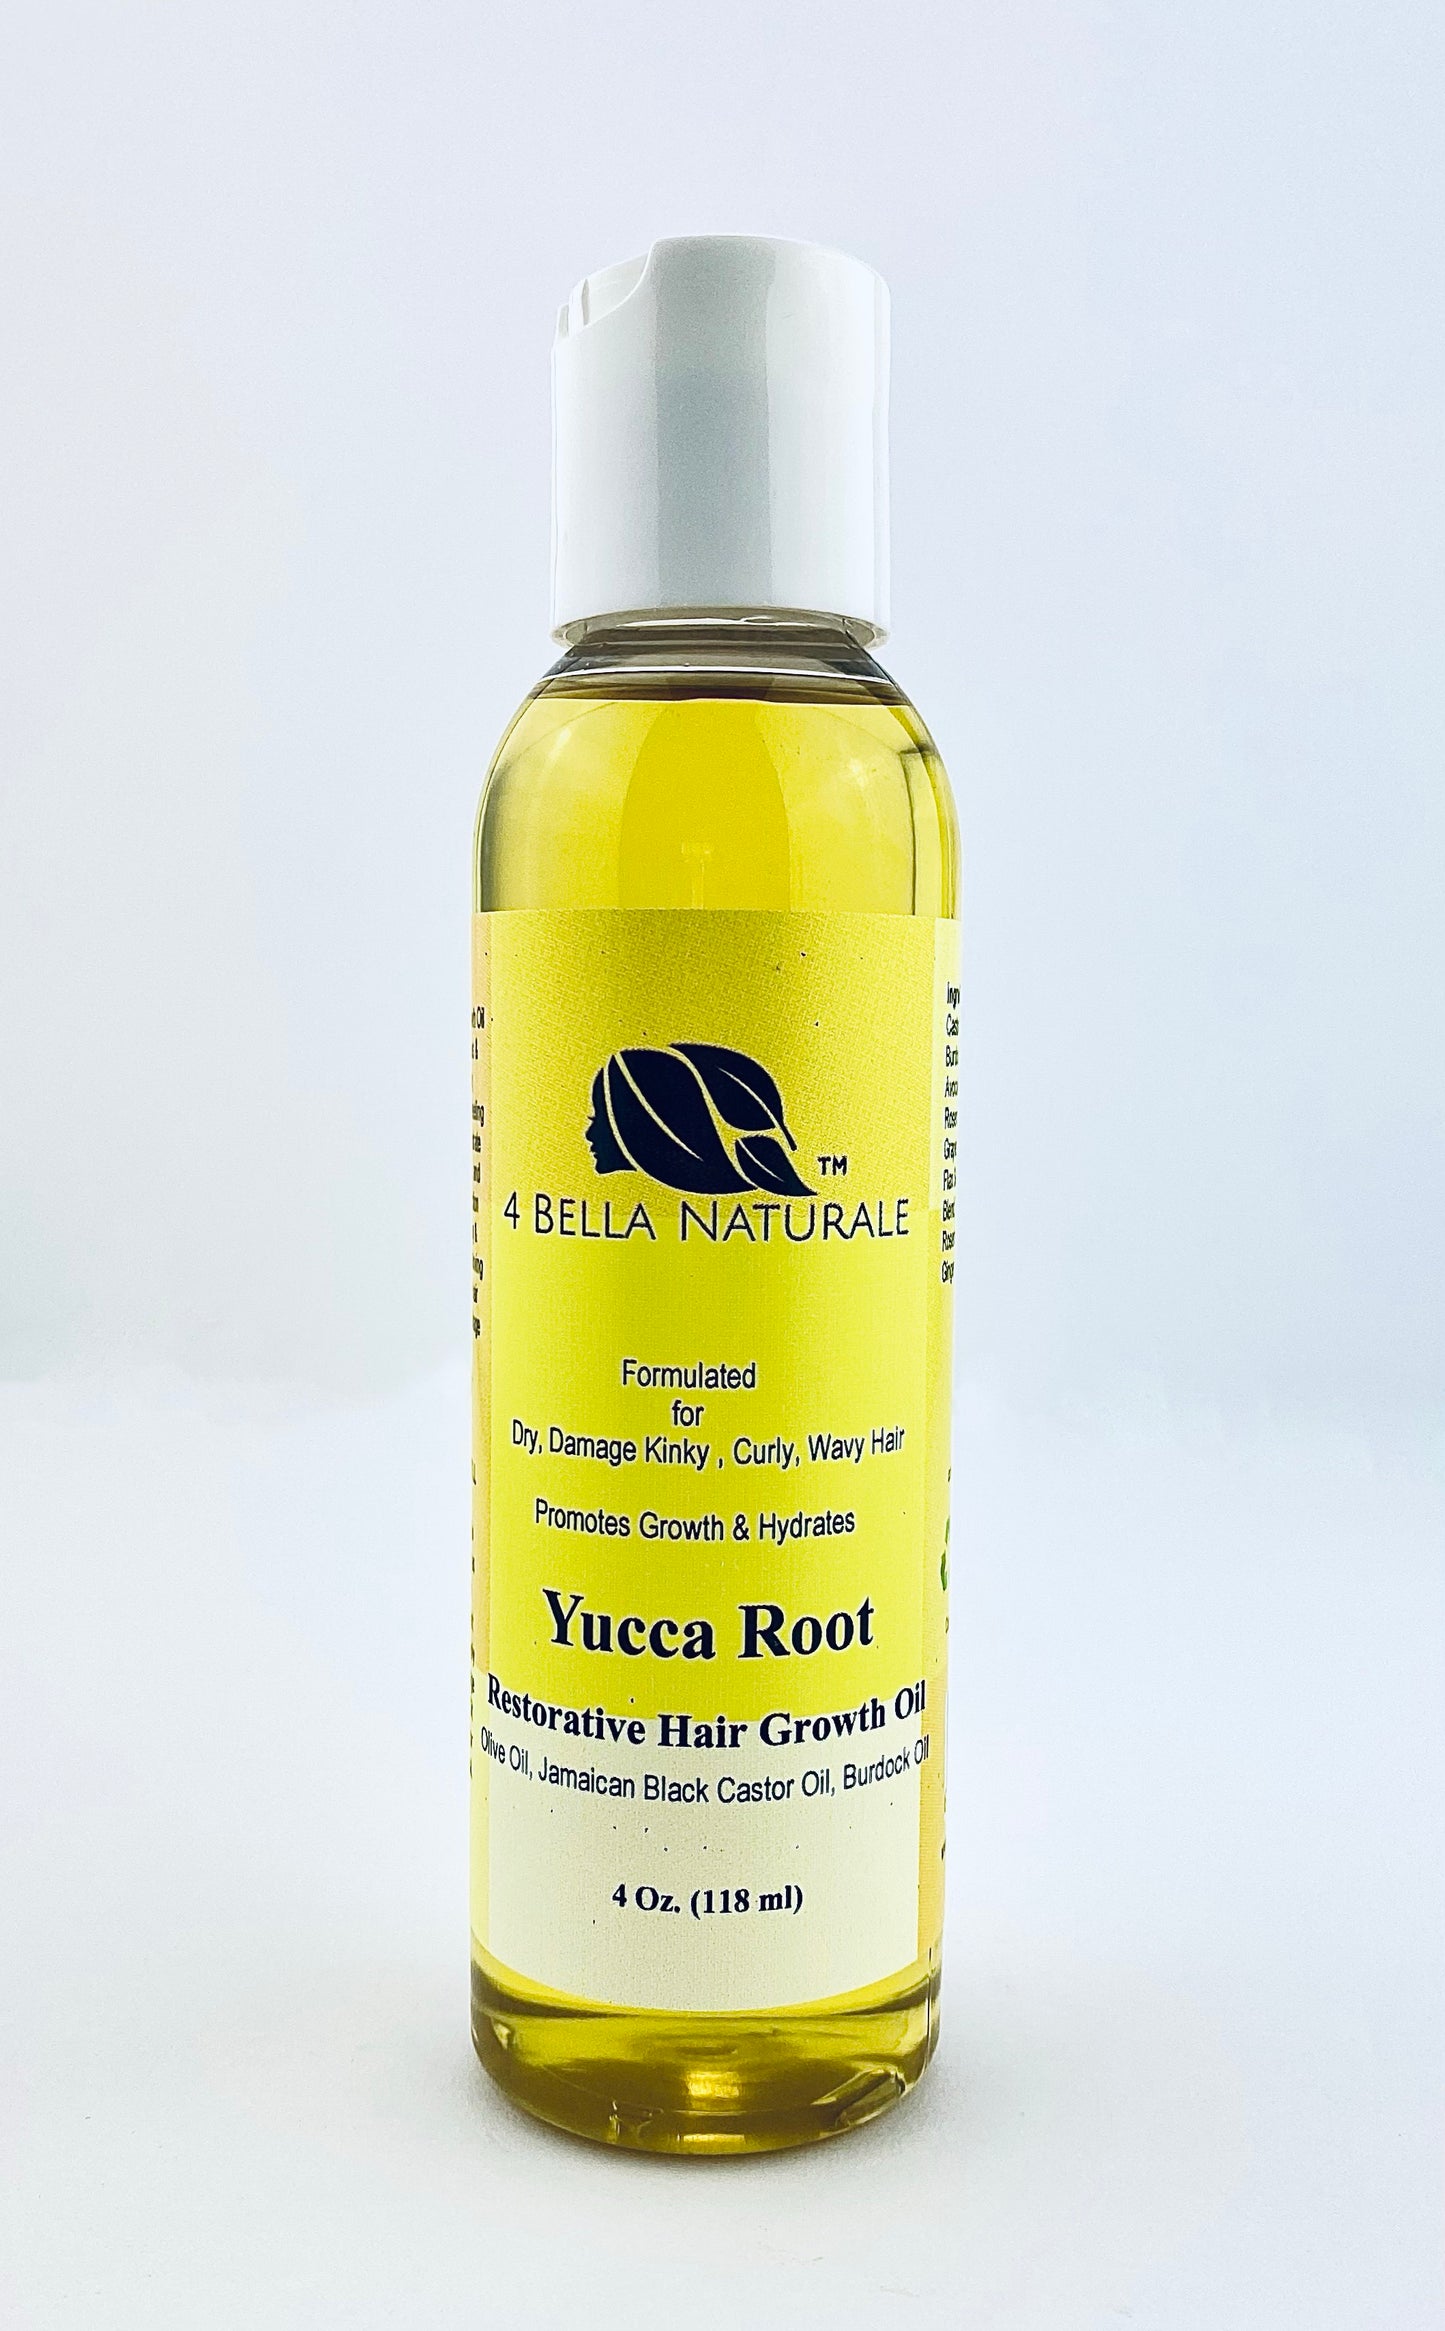 Yucca Root Restorative Hair Growth Oil